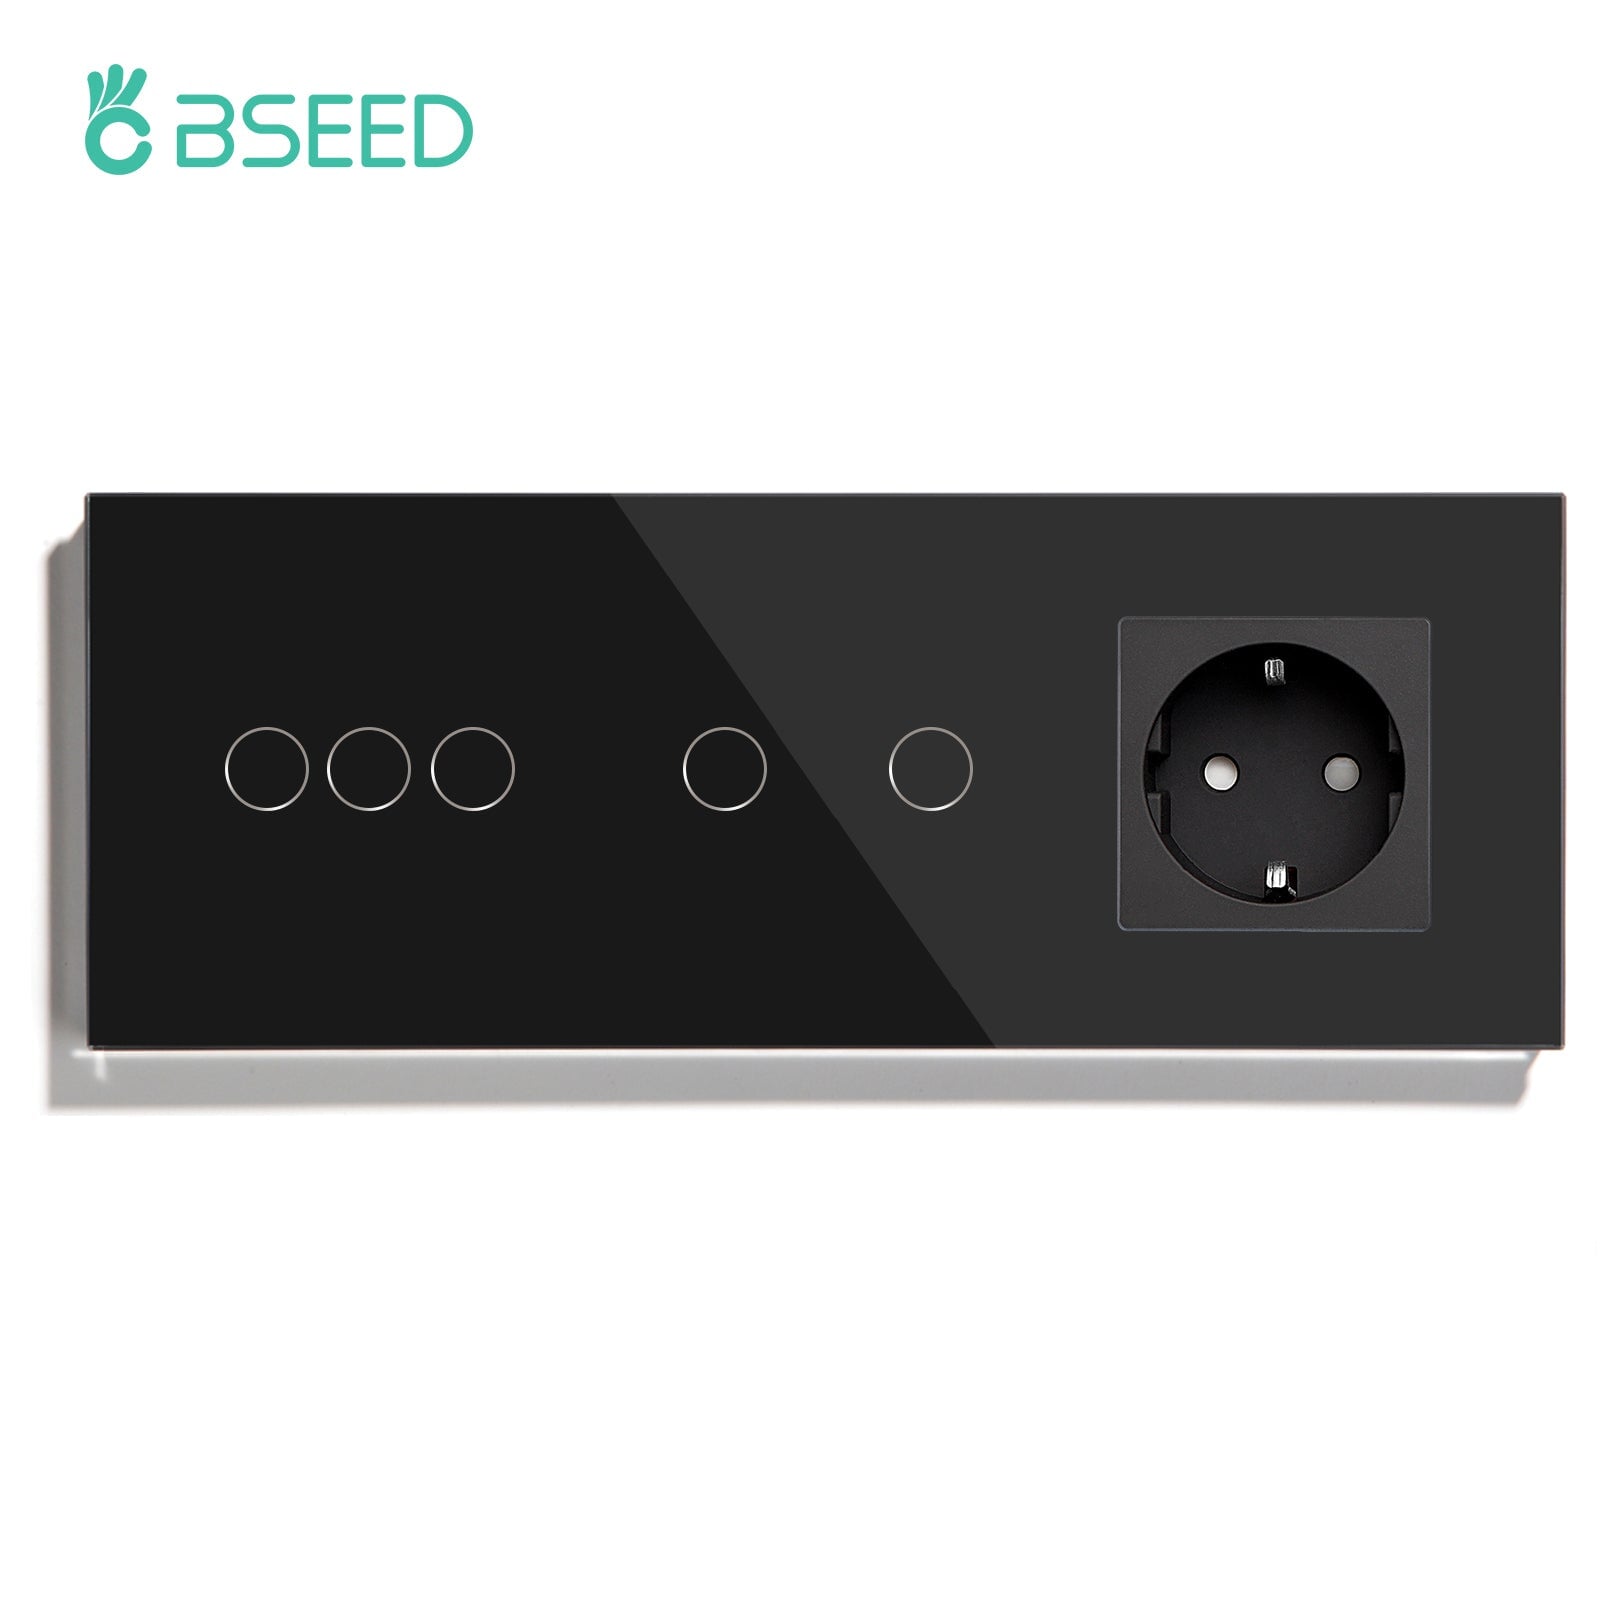 BSEED Double Touch 1/2/3 Gnag 1/2/3 Way Light Switch With EU Socket Power Outlets & Sockets Bseedswitch Black 3gang+2gang 1Way